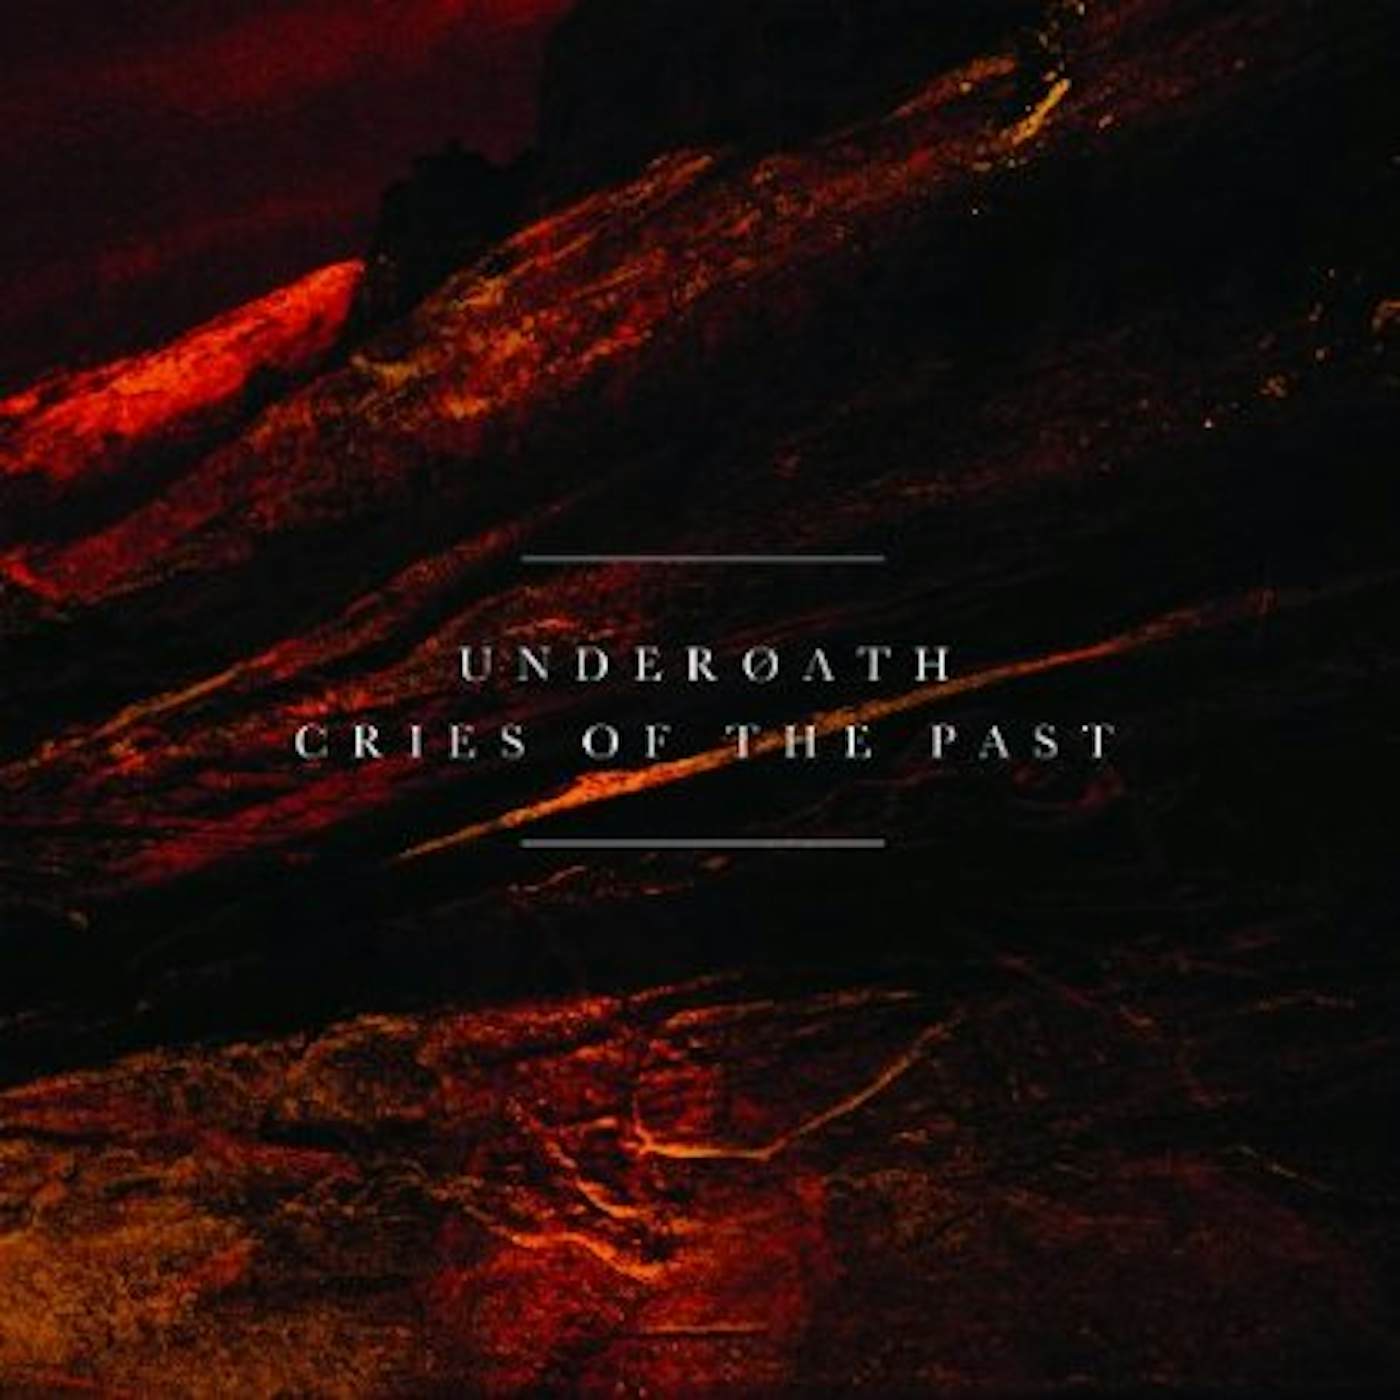 Underoath CRIES OF THE PAST CD